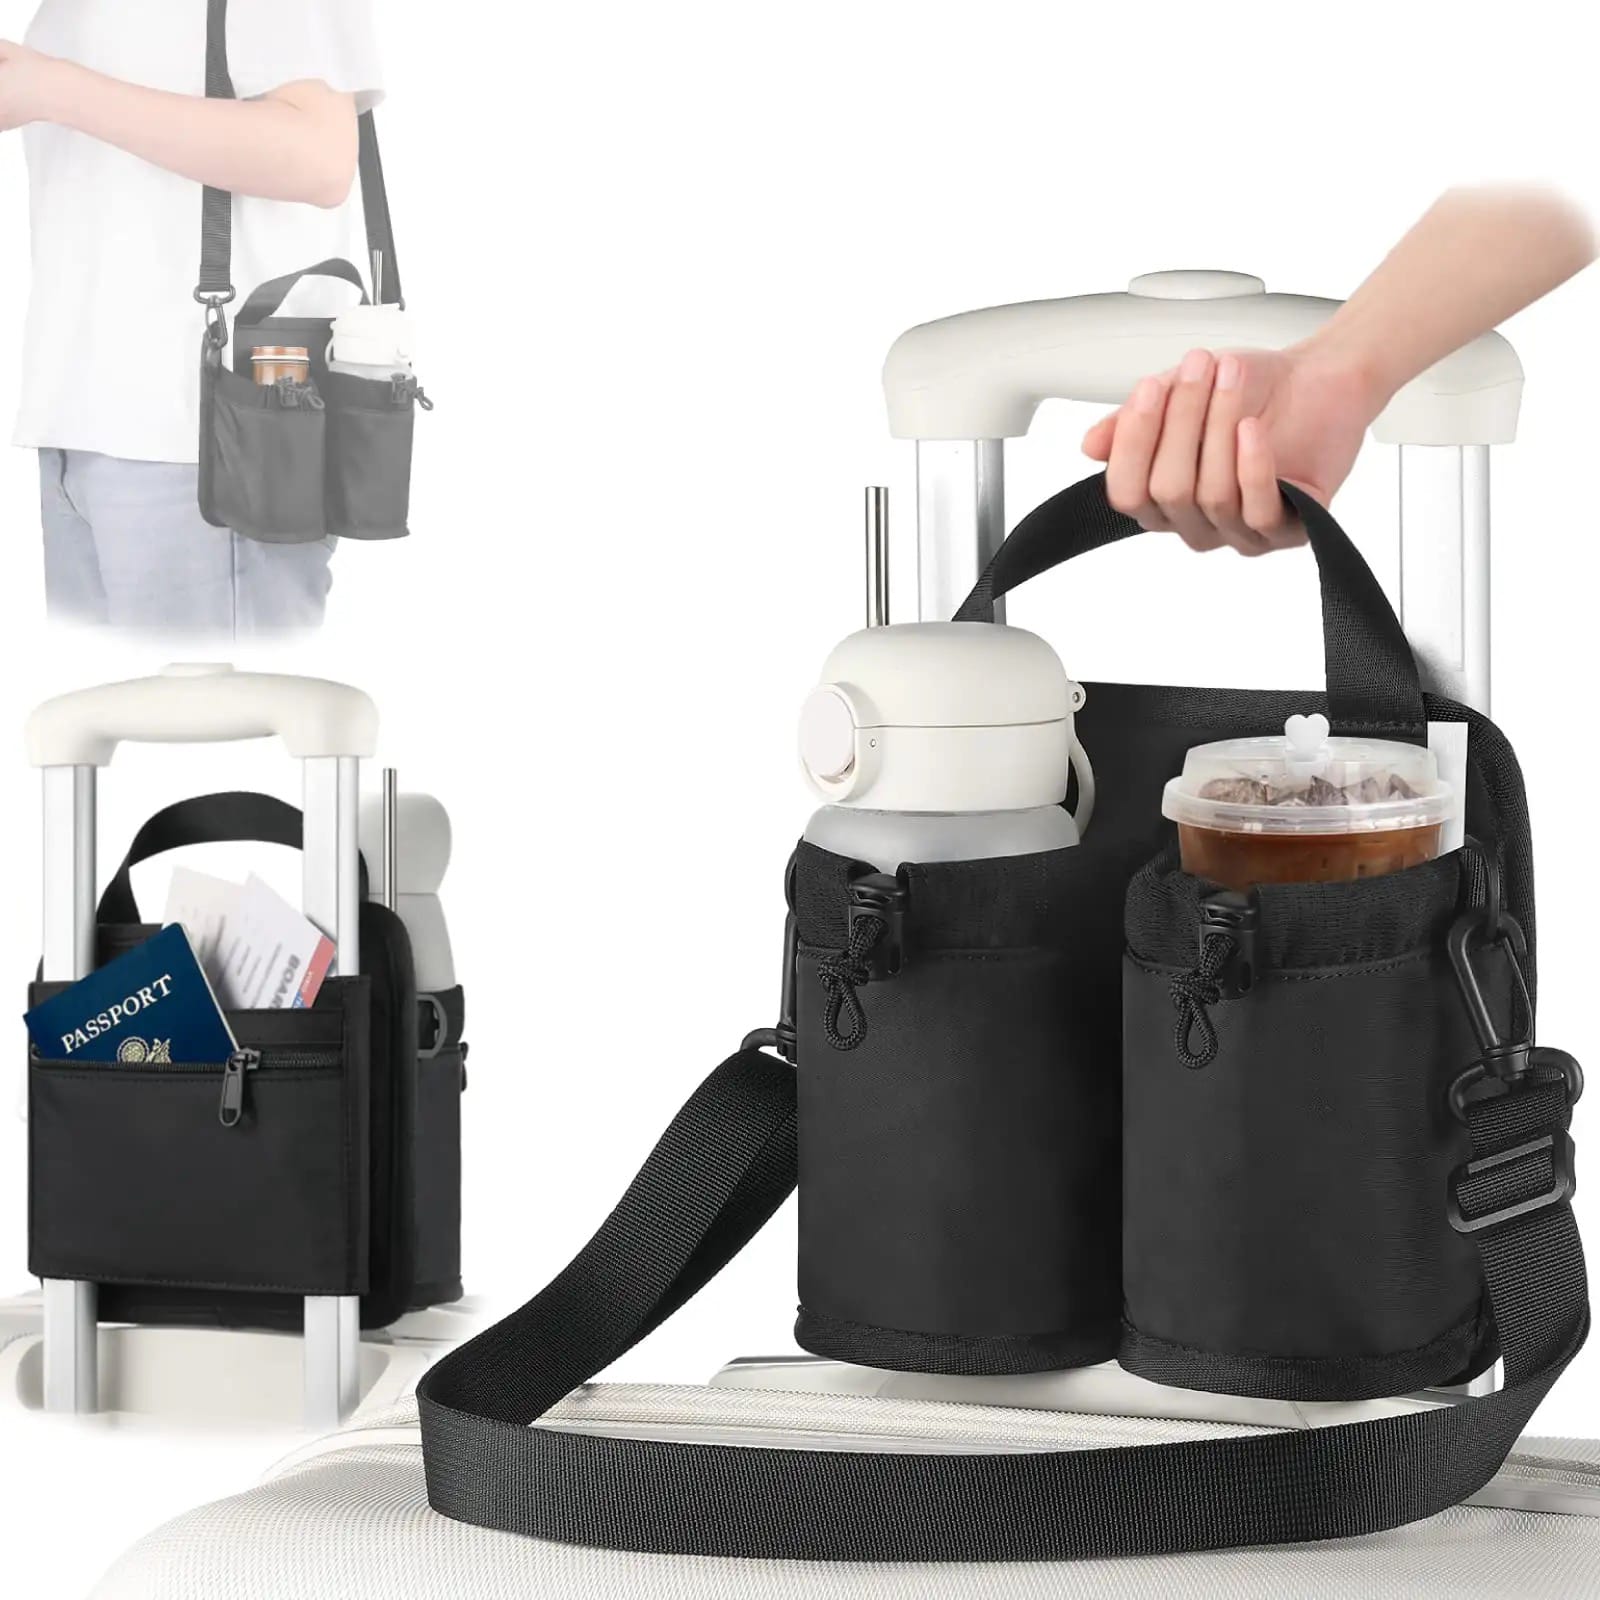 A Person is Holding Travel Drink Holder Bag.